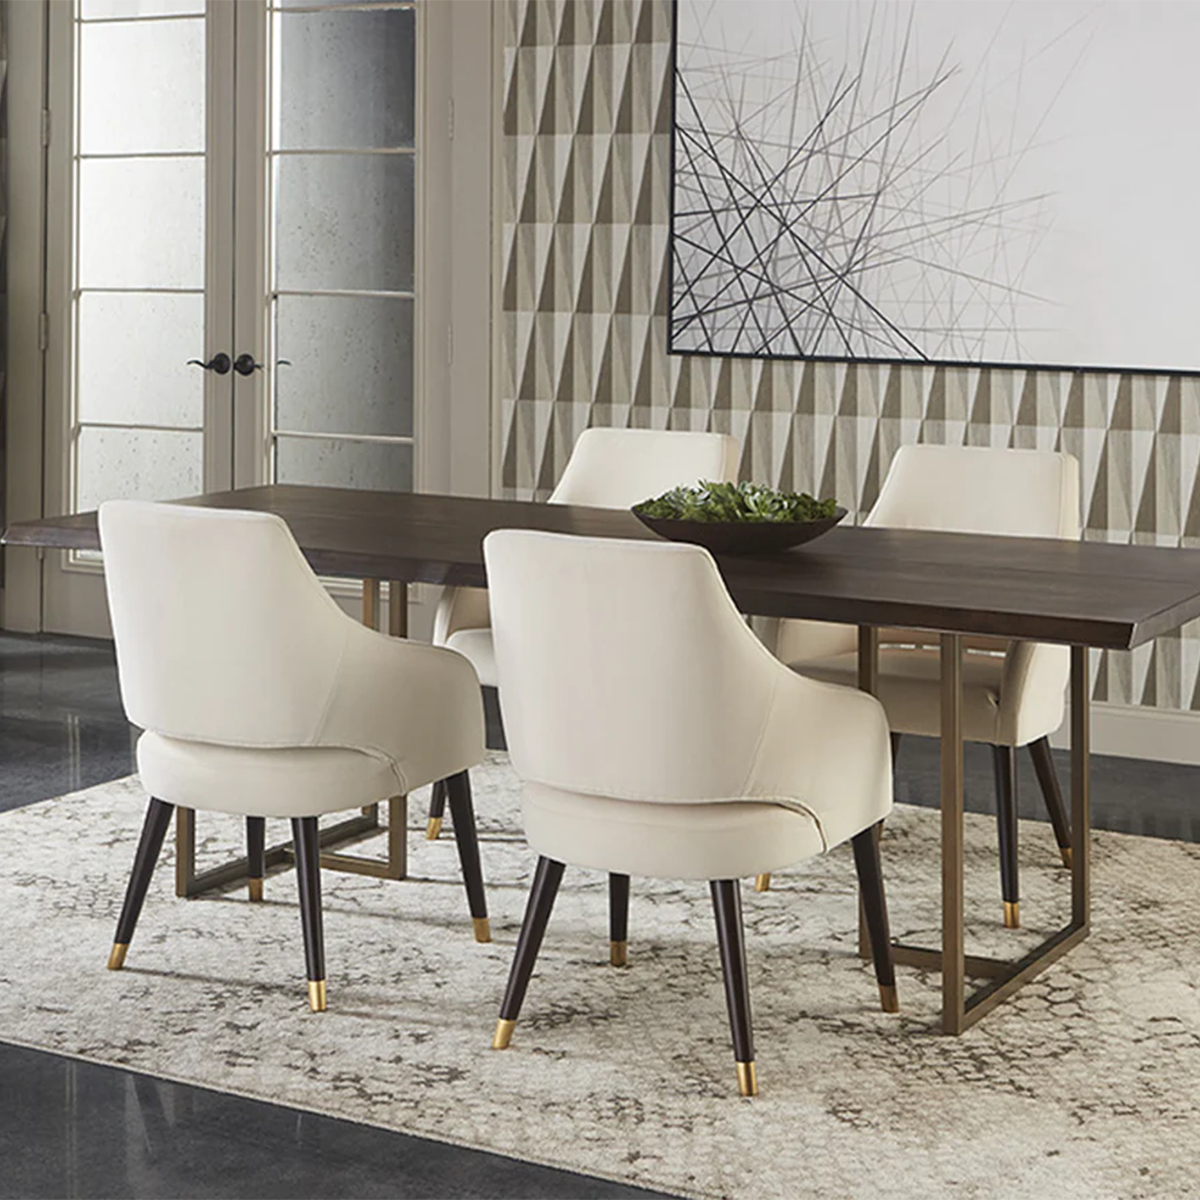 Donnelly Dining Table in a Luxury Livingroom